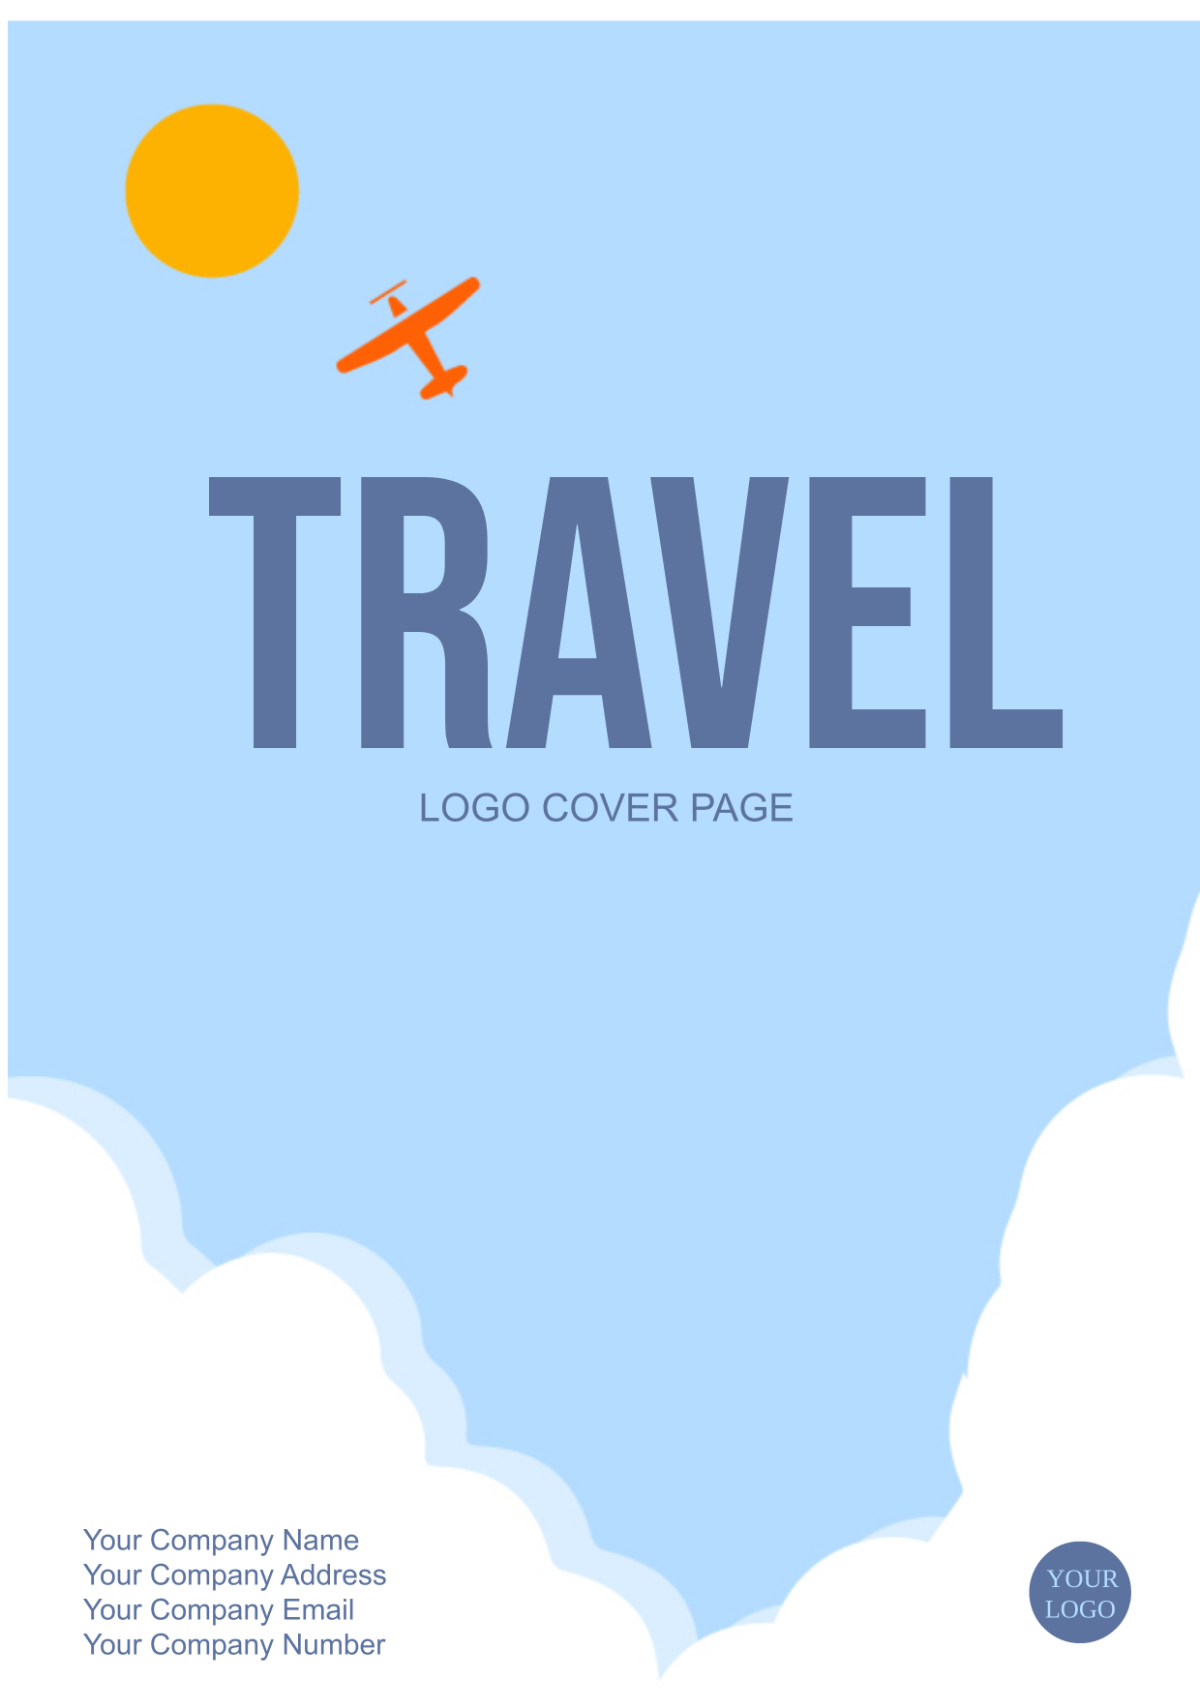 Travel Logo Cover Page